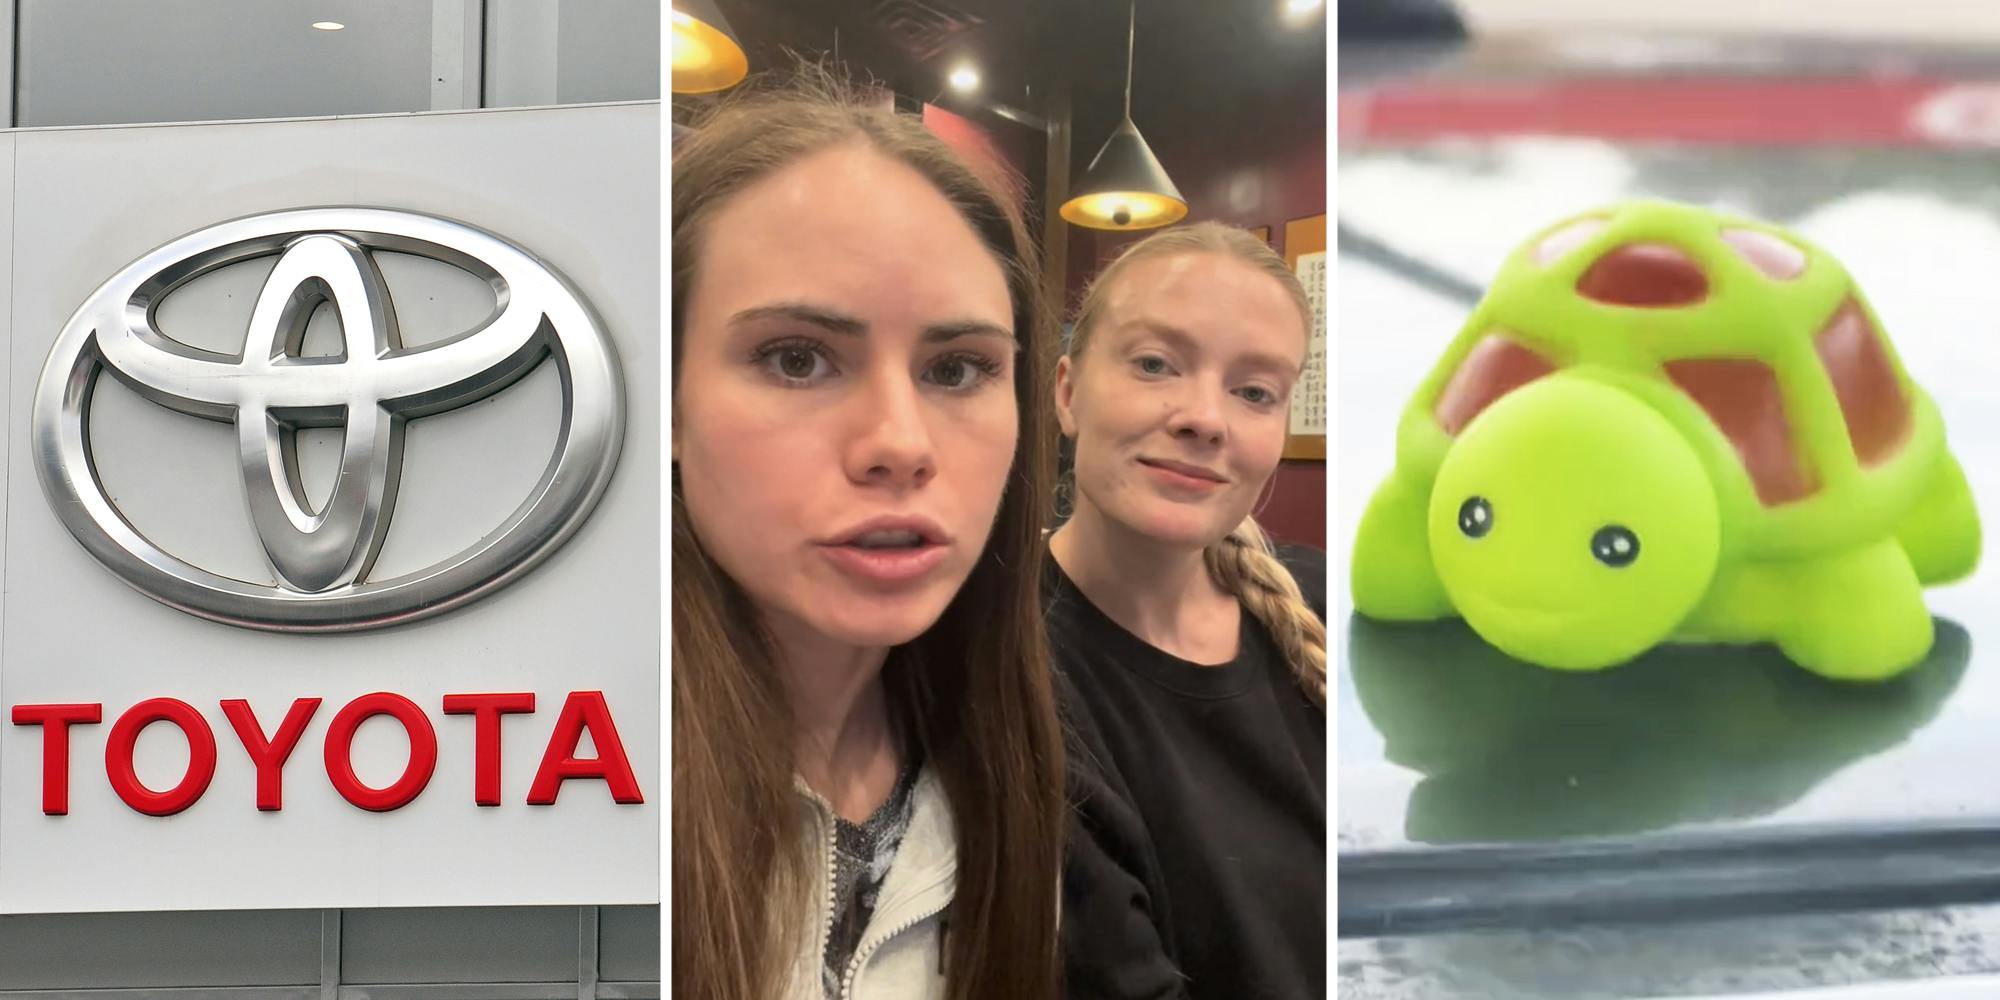 ‘A Jeep could never’: Why are these women putting turtles on the ‘most exclusive’ Toyotas?